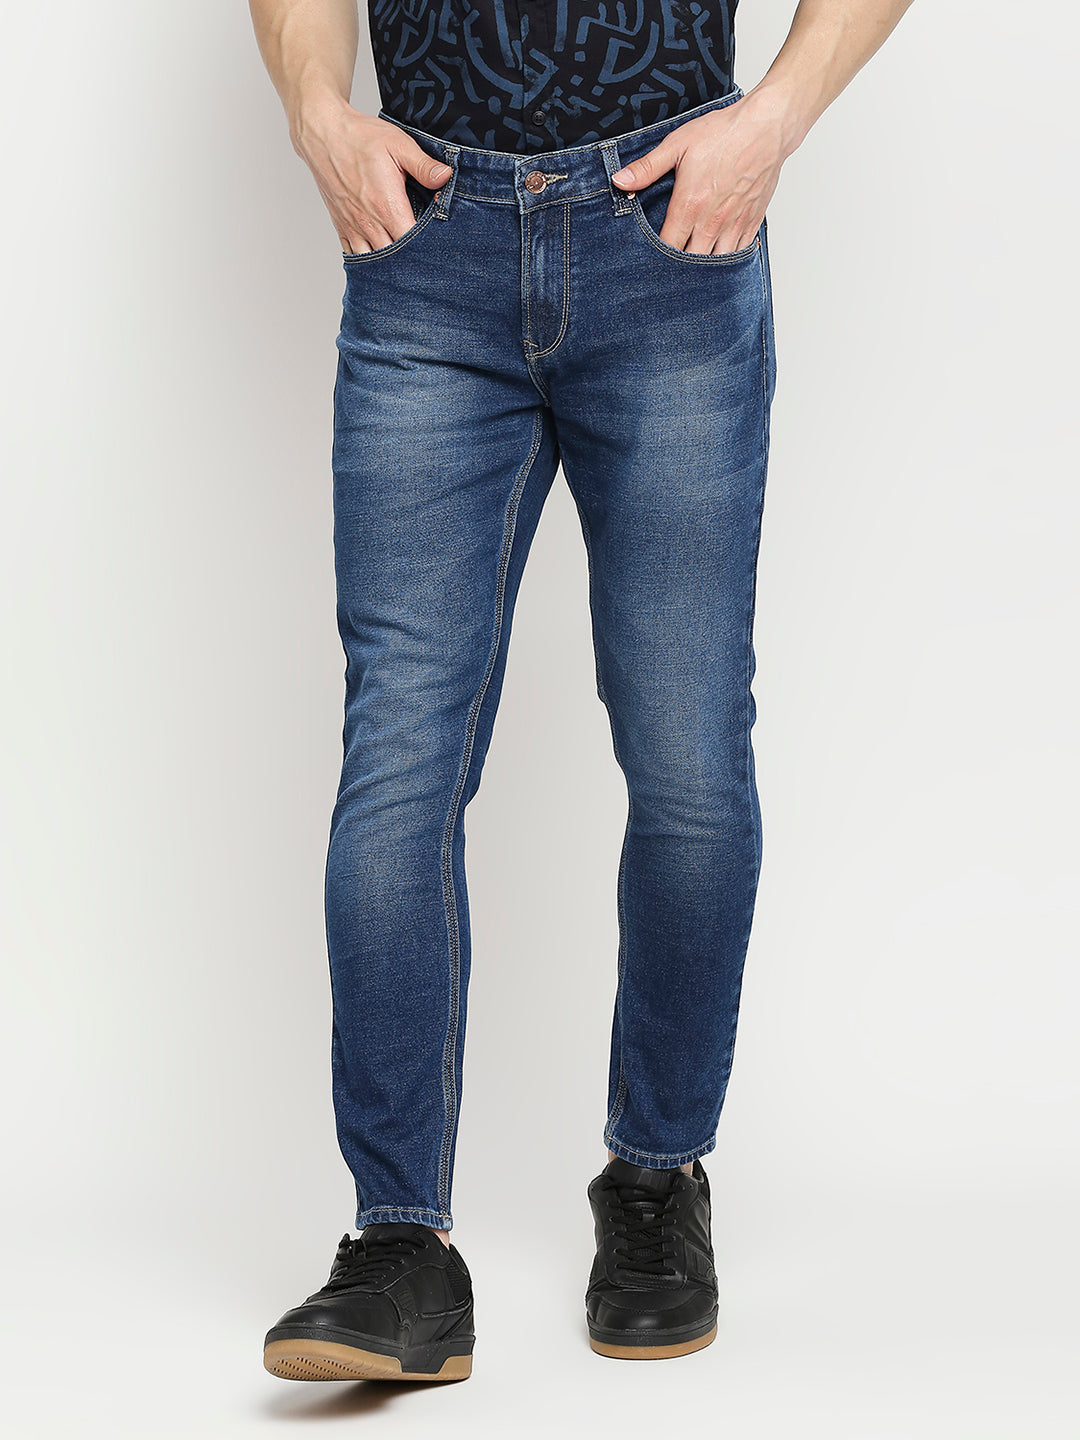 Buy Jeans for Men Online | Spykar - Young and Restless – Spykar Lifestyles